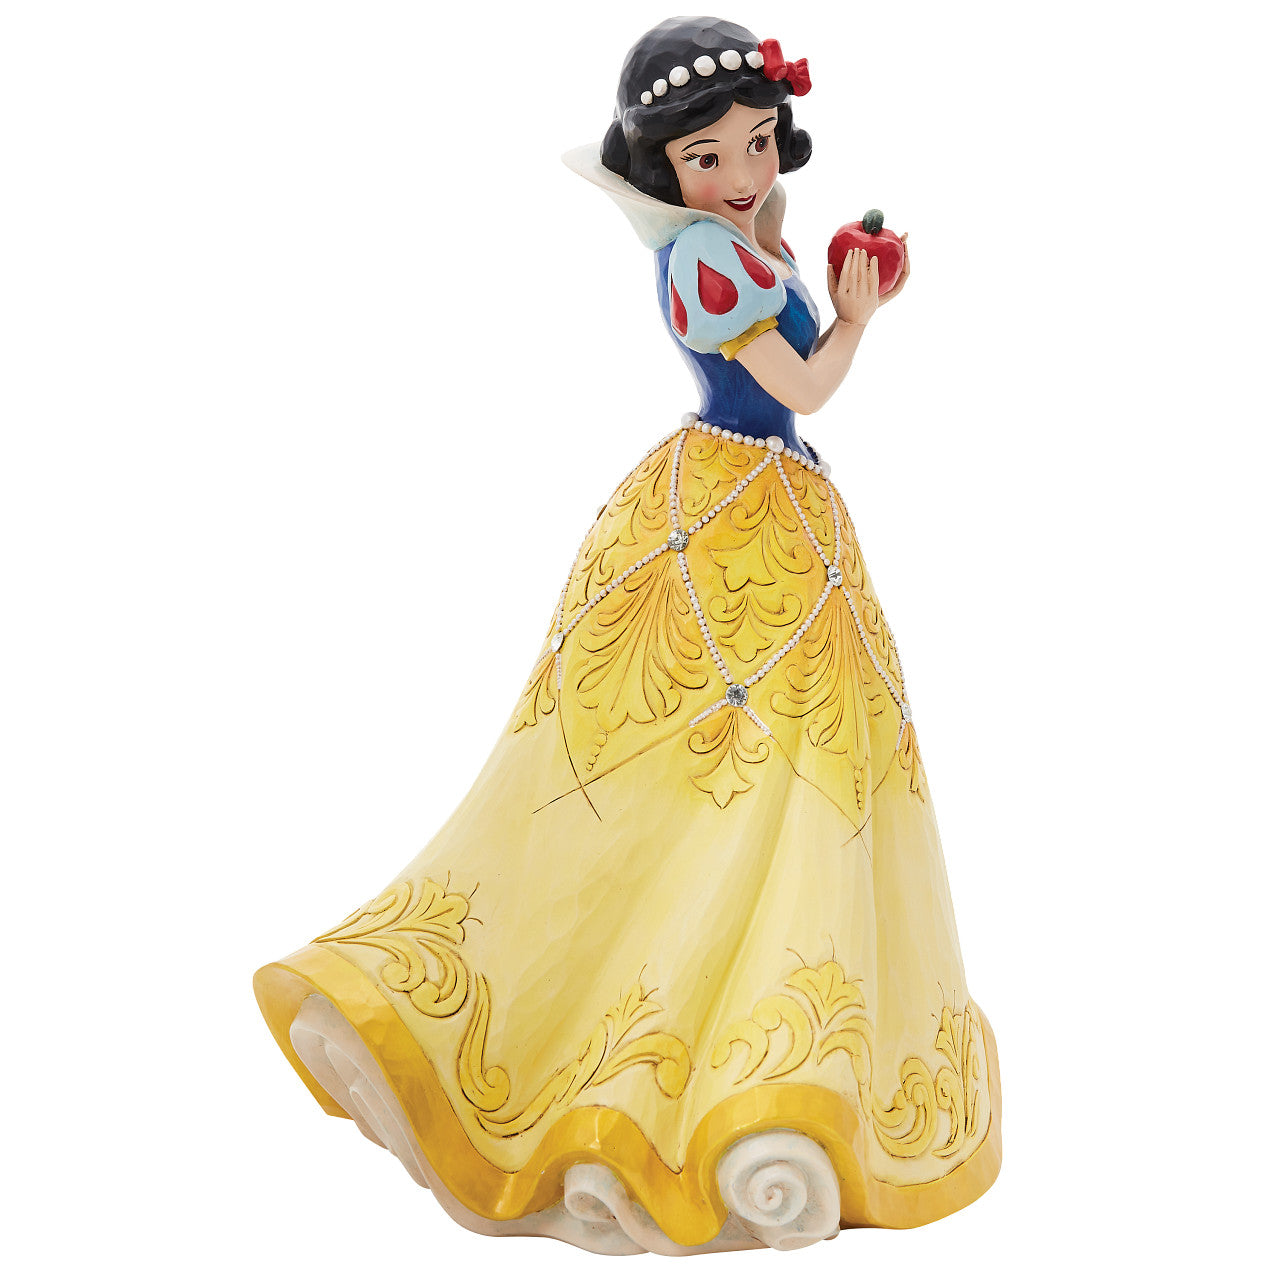 The Fairest of All - Snow White Deluxe Figurine